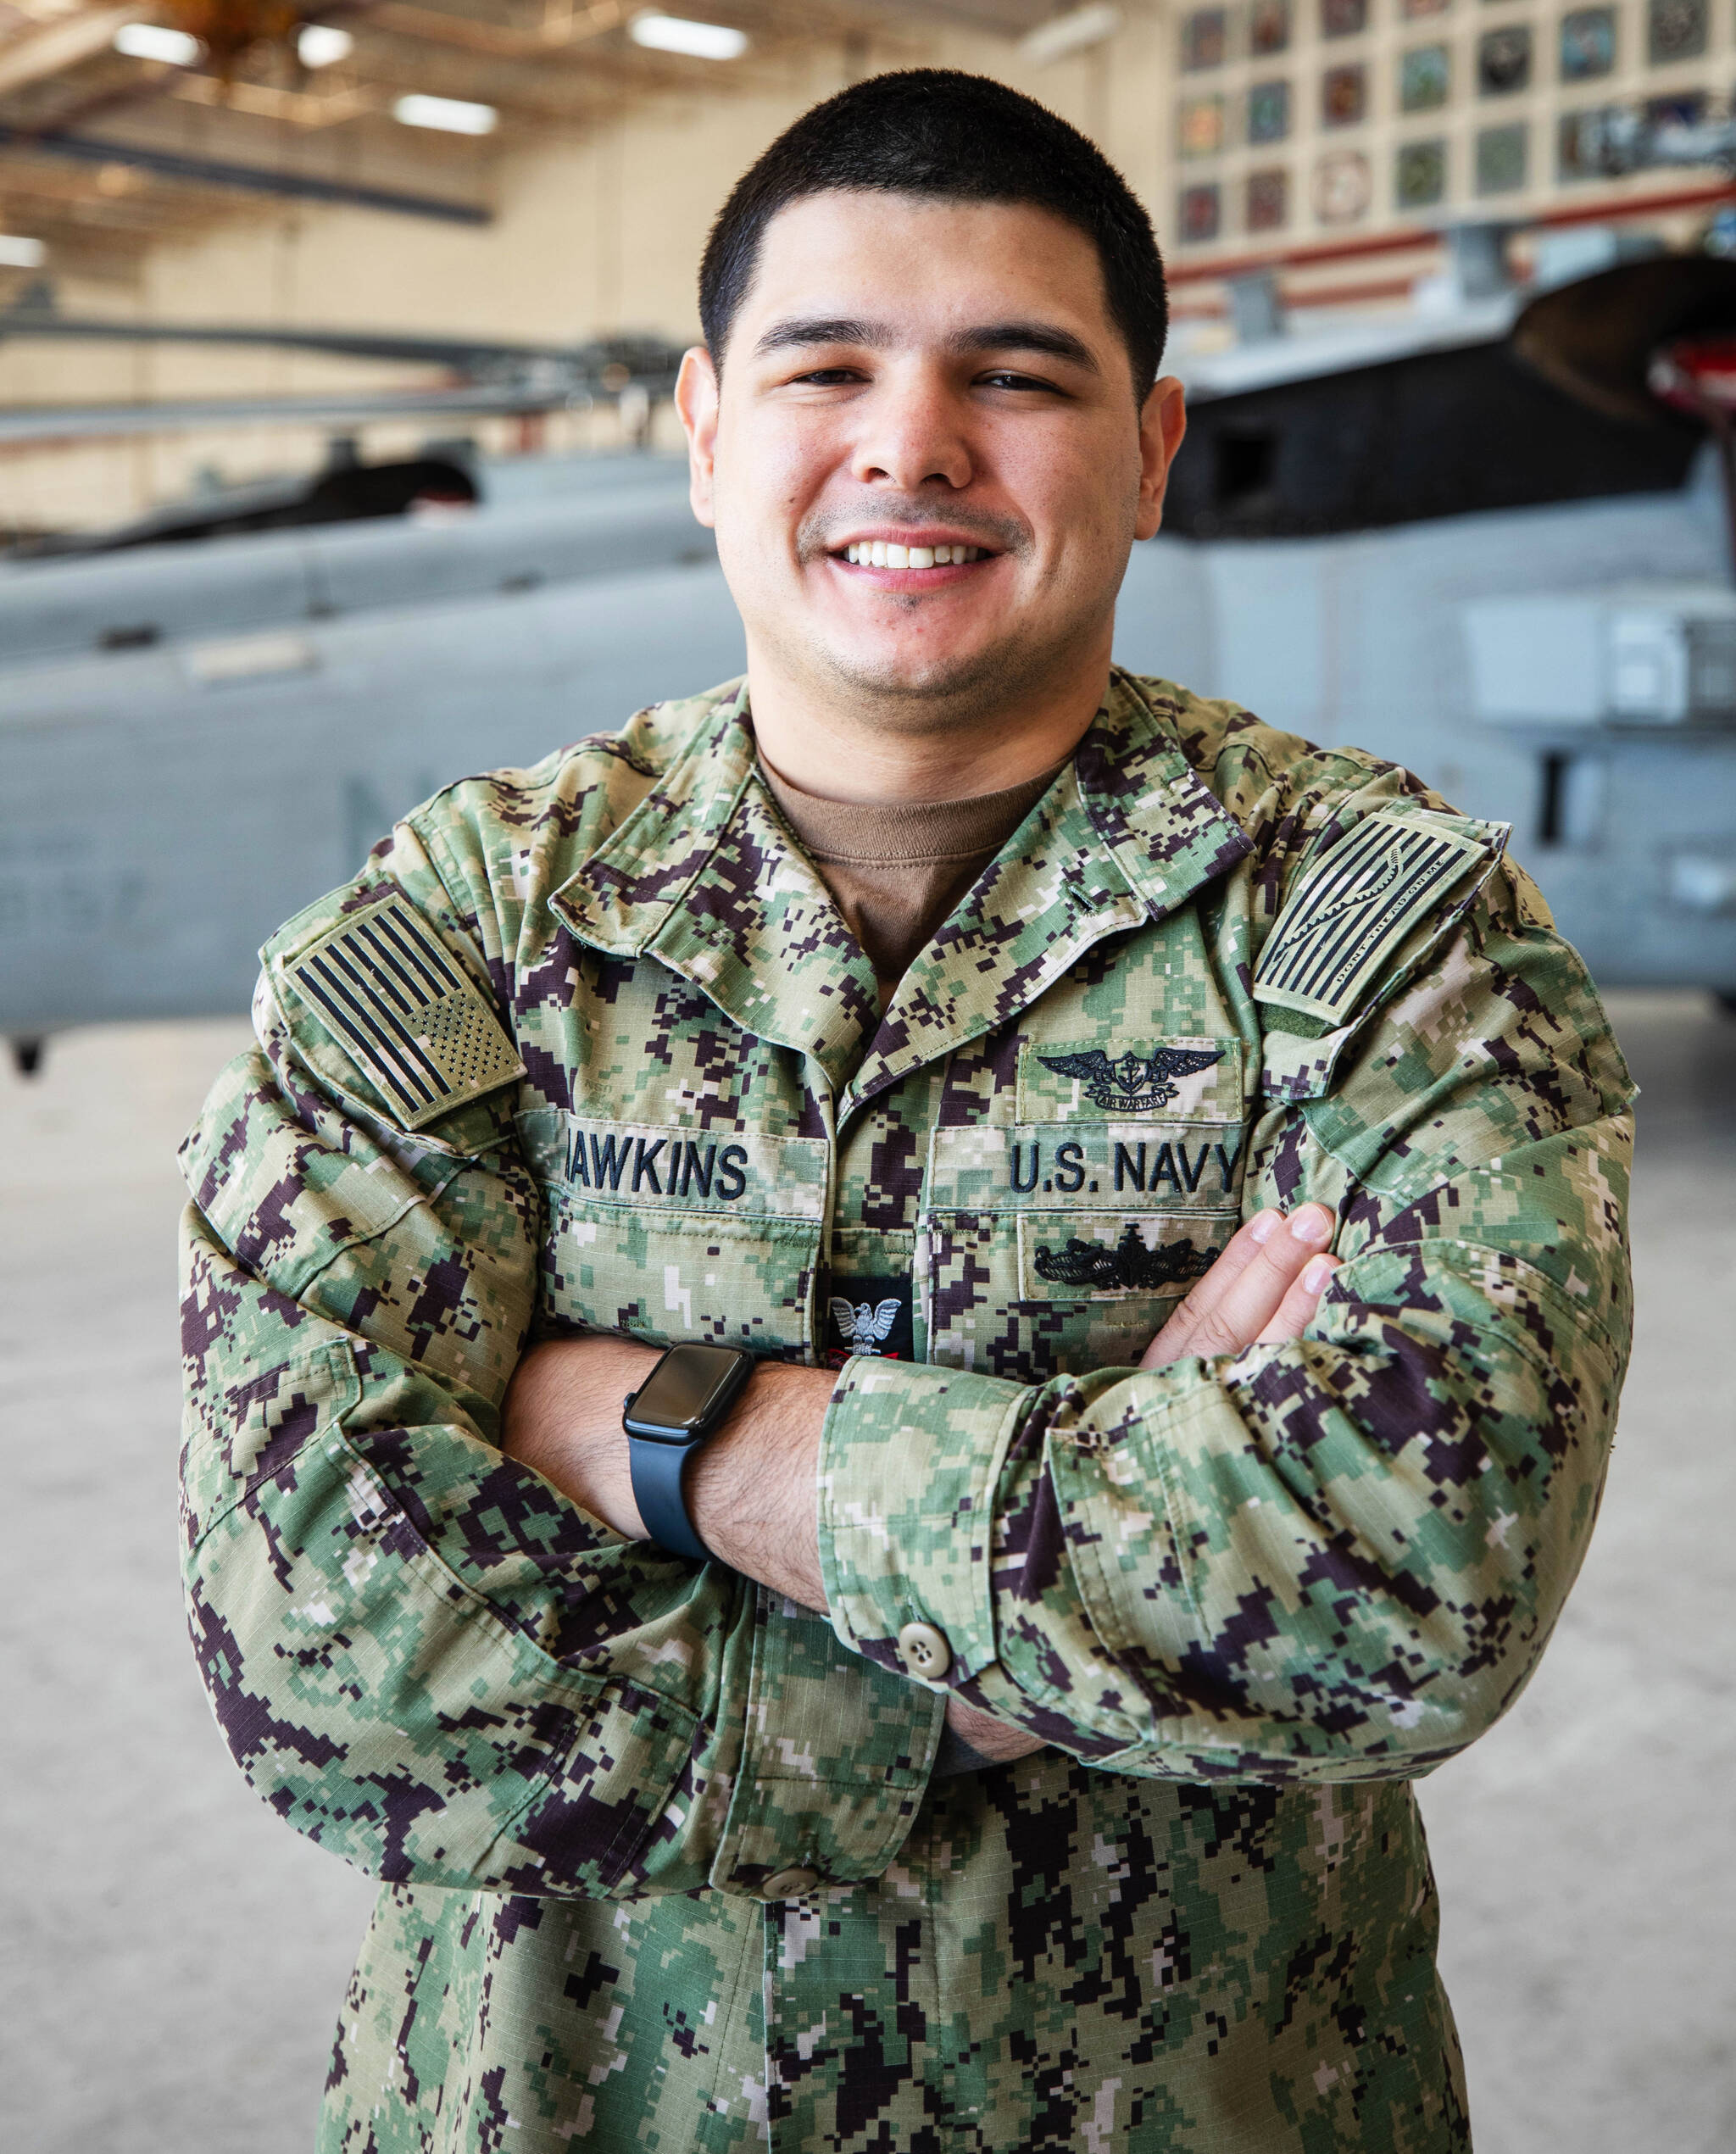 Petty Officer 2nd Class Logan Hawkins, a native of Kent, serves in the U.S. Navy in San Diego. COURTESY PHOTO, Jordan Jennings, Navy Office of Community Outreach